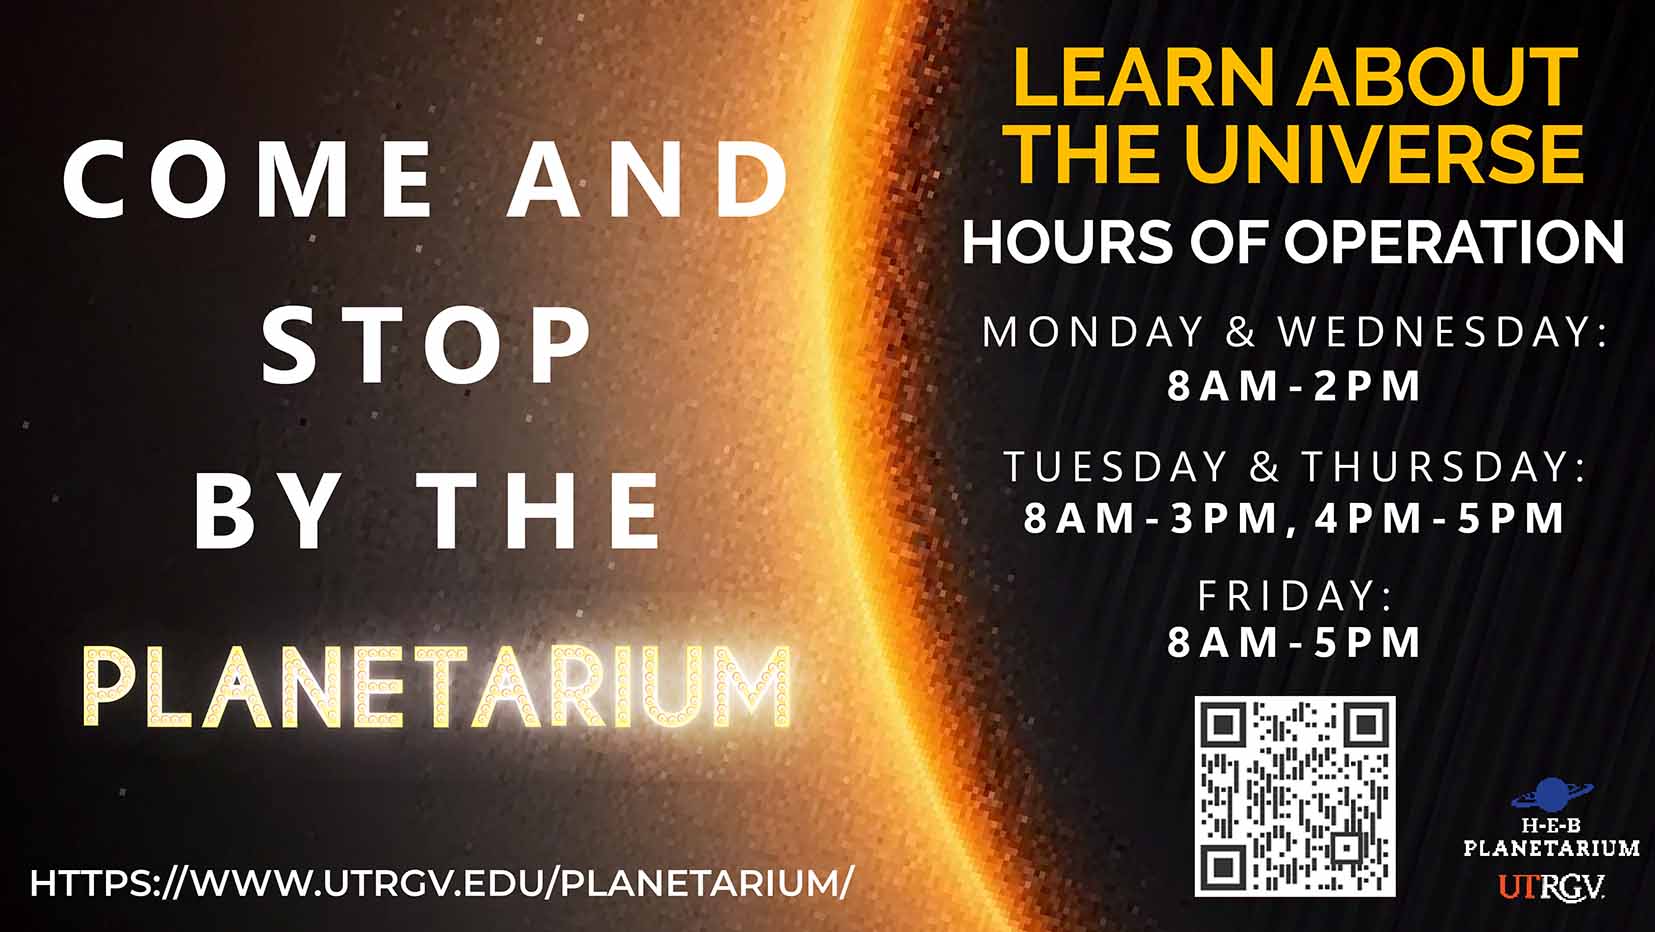 Planetarium Hours of Operation Monday through Friday from 8AM to 5PM and Tuesdays from 5PM to 10PM